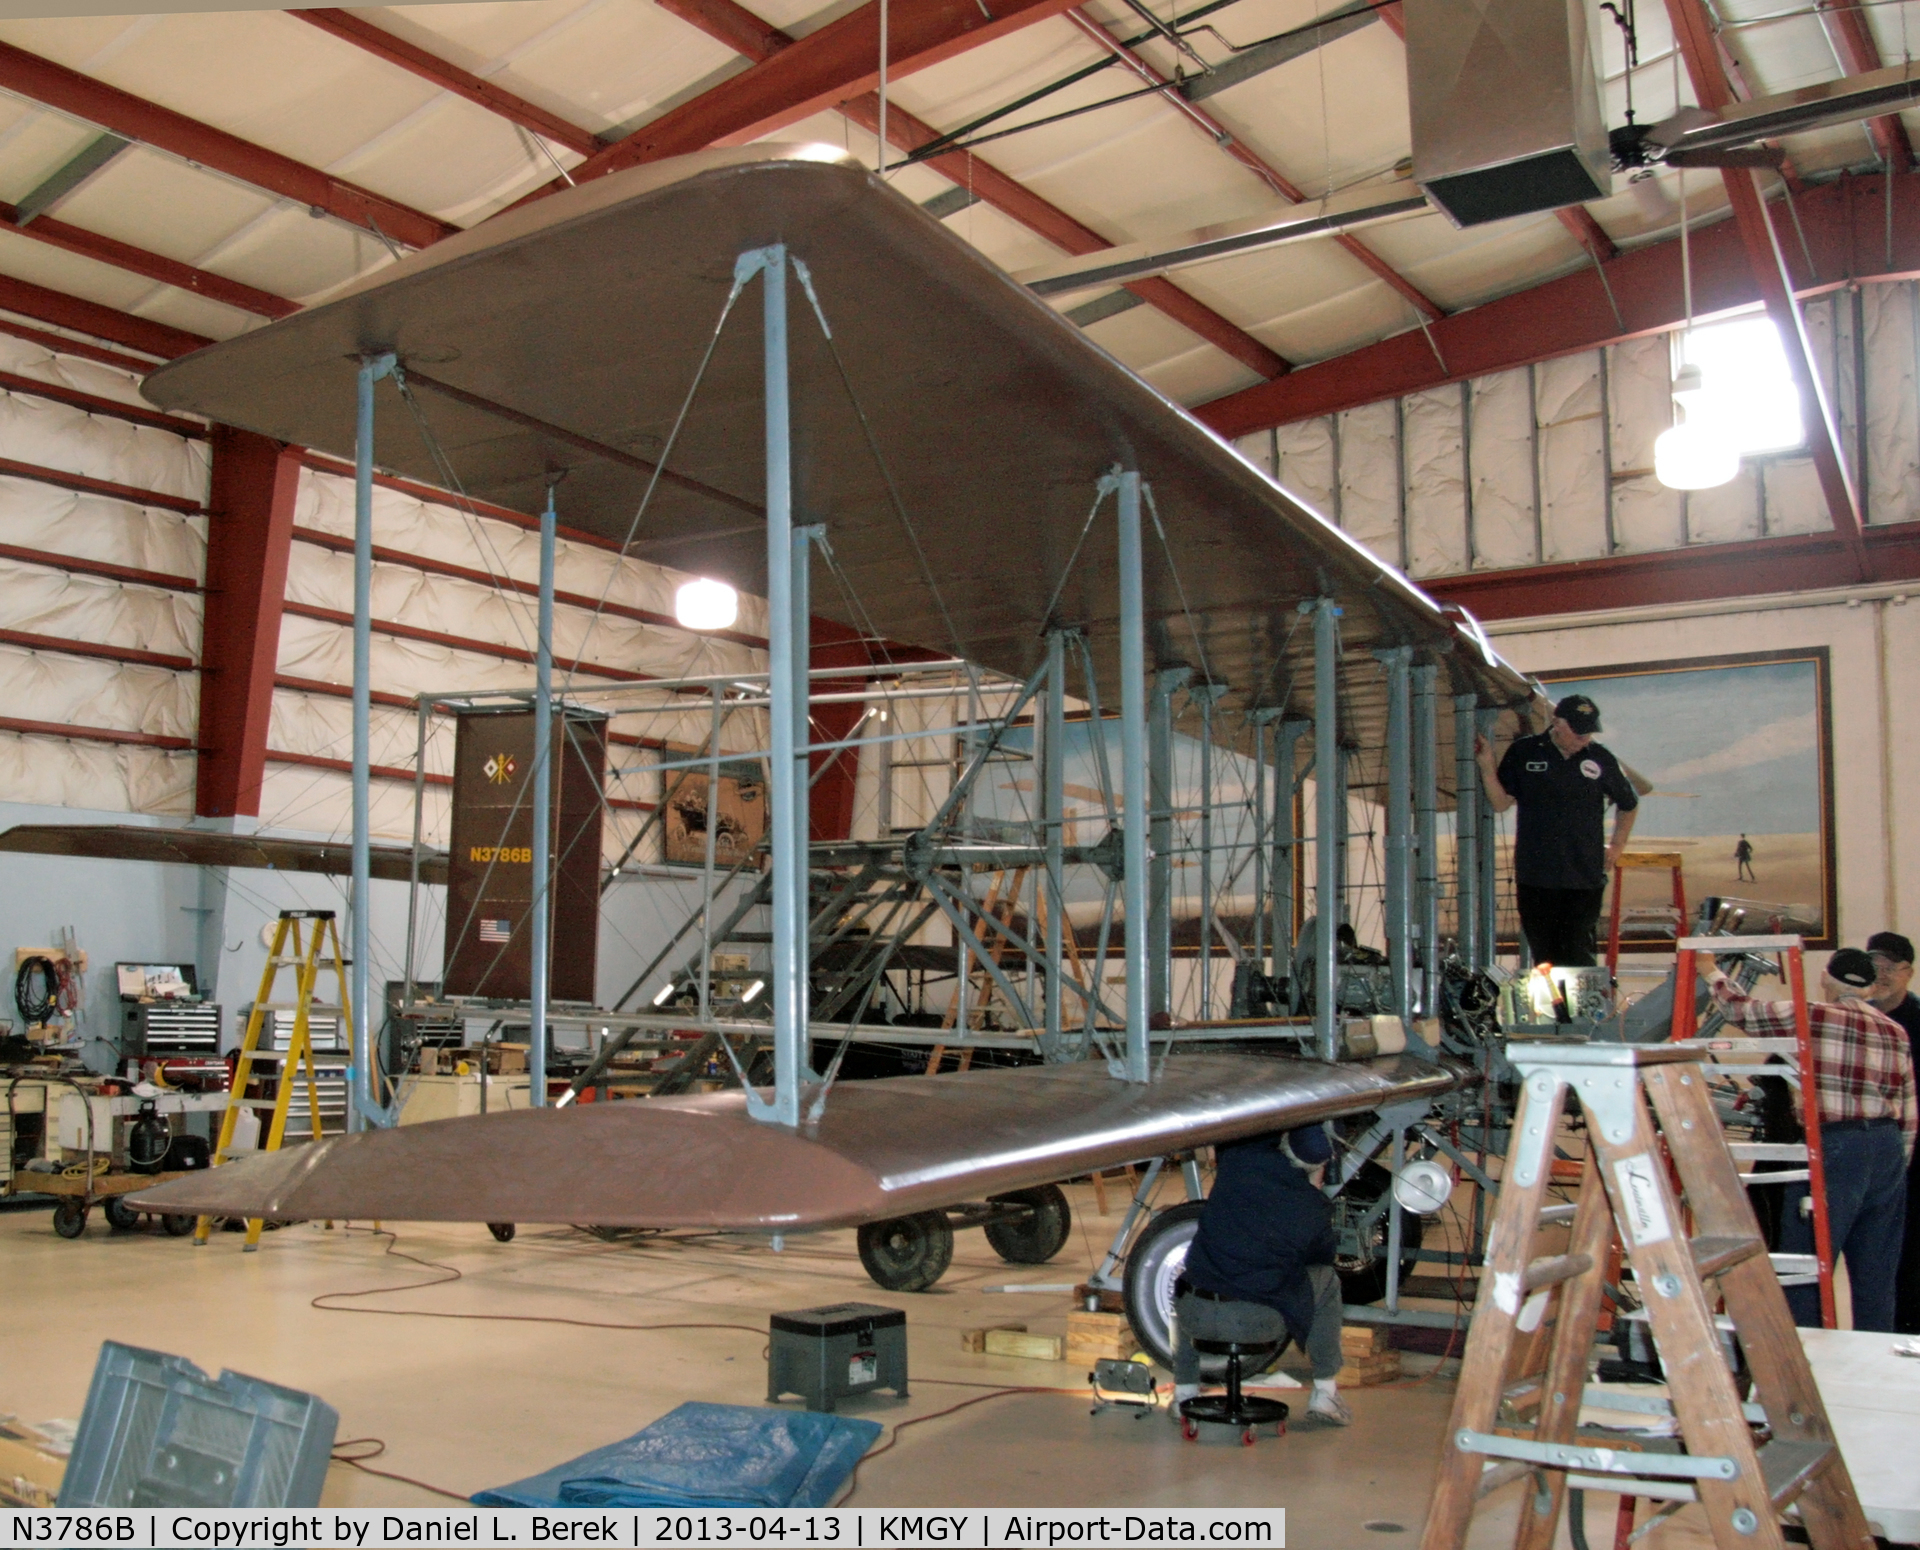 N3786B, 1981 Wright Model B Flyer Replica C/N 001, Old eighty-six bravo gets some attention and TLC in preparation for the 2013 flying season.